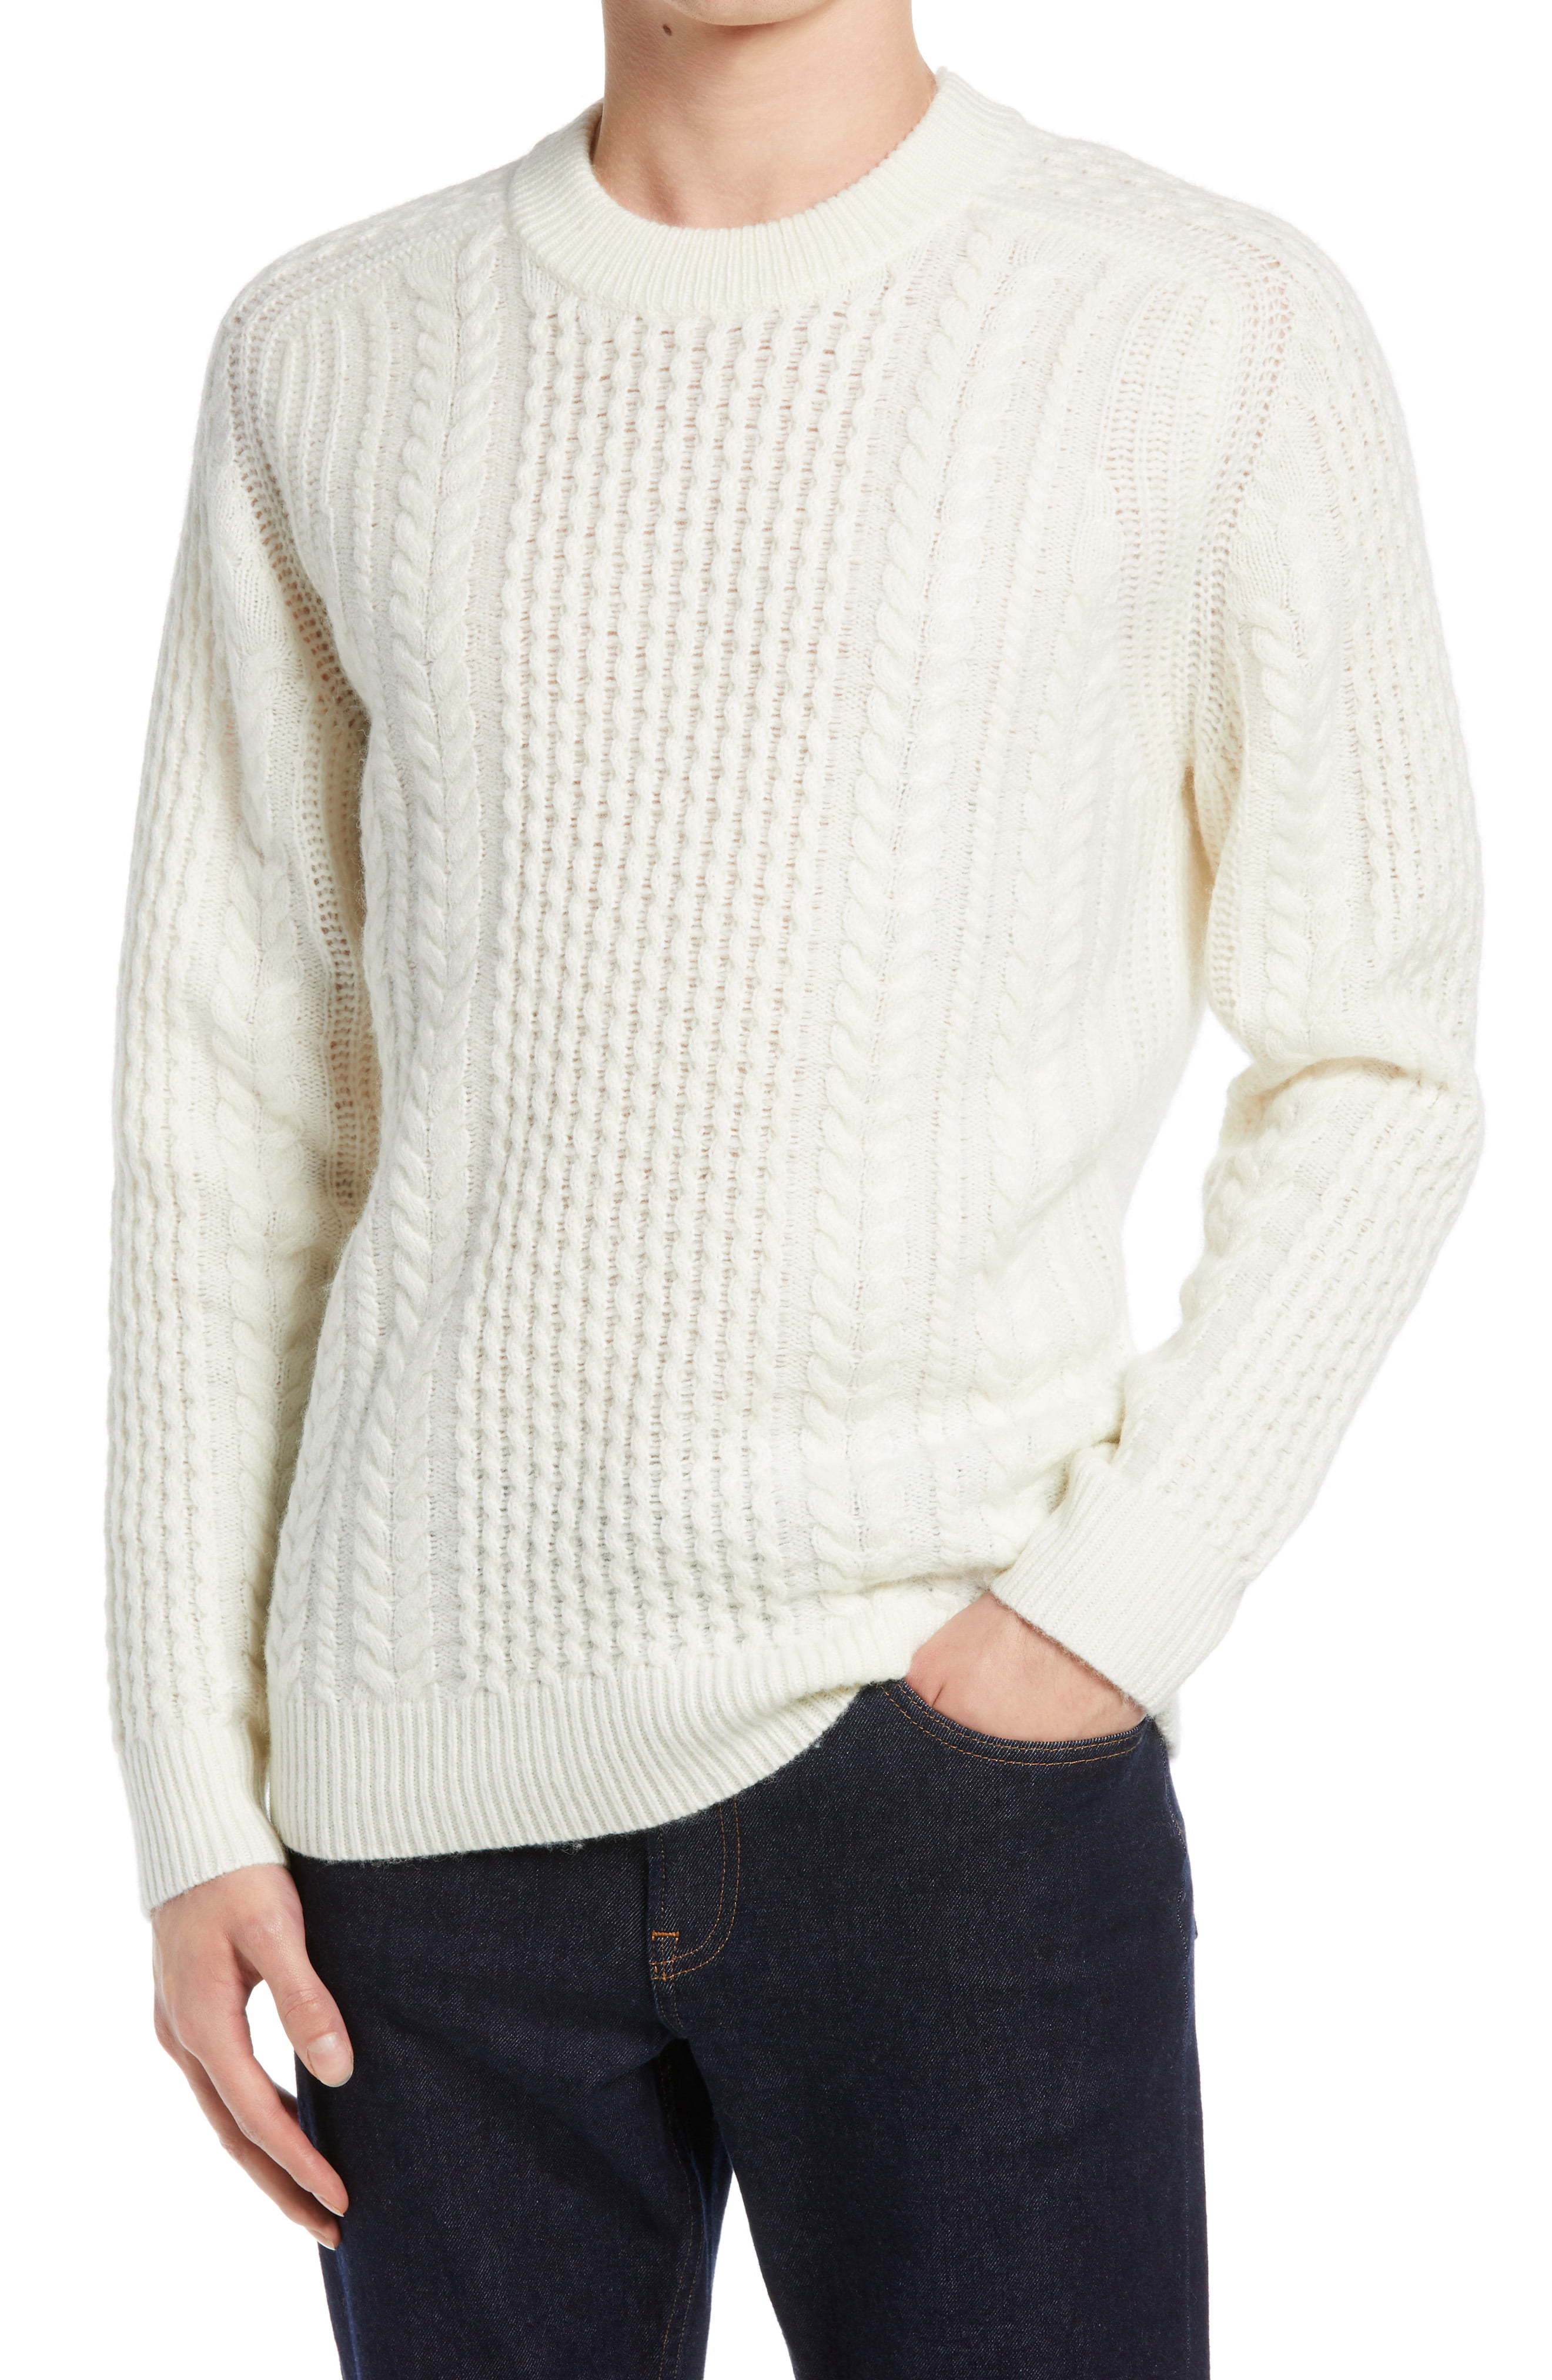 French Connection Wool Blend Cable Knit Crewneck Sweater, $118 ...